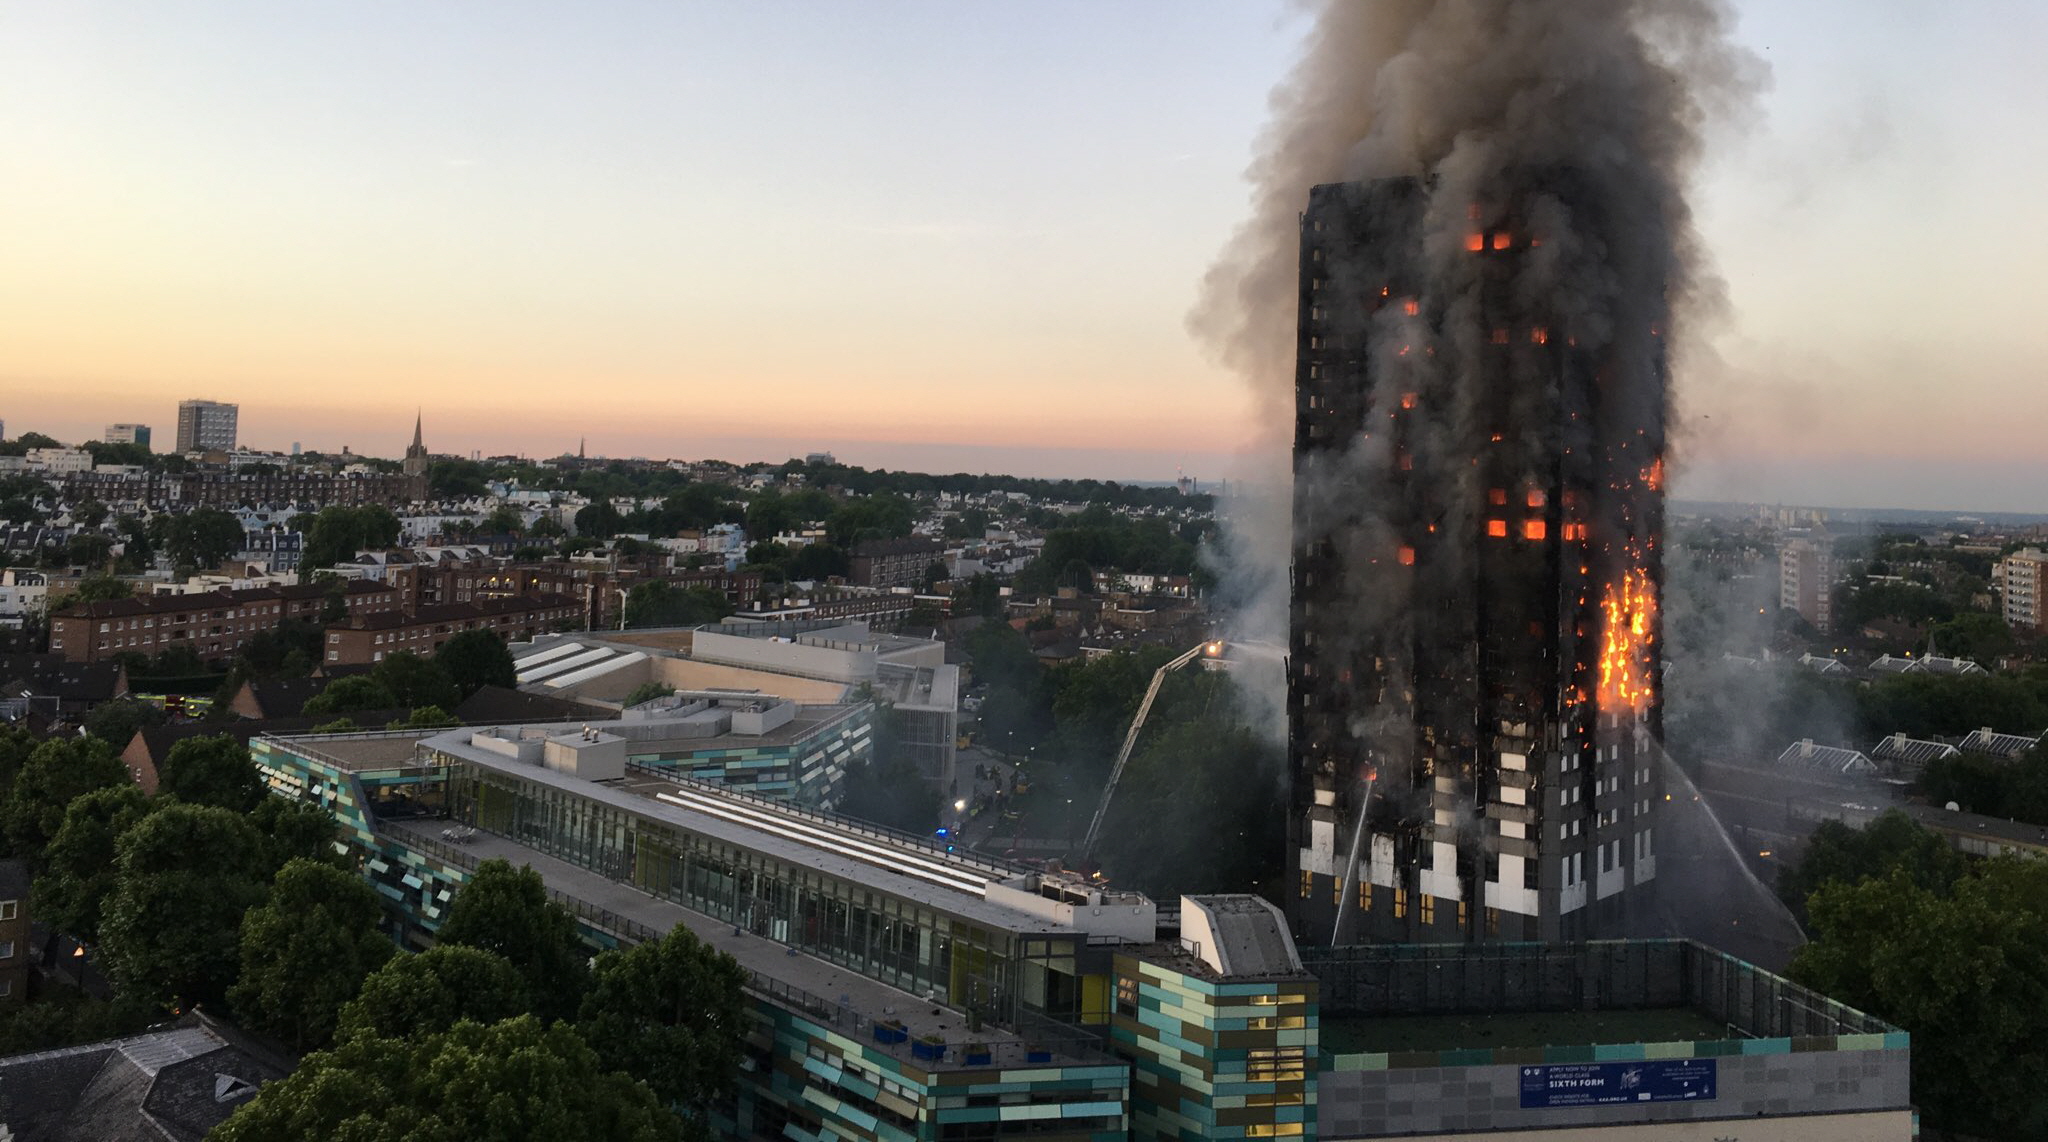 We are all living in the shadow of another Grenfell Towers.